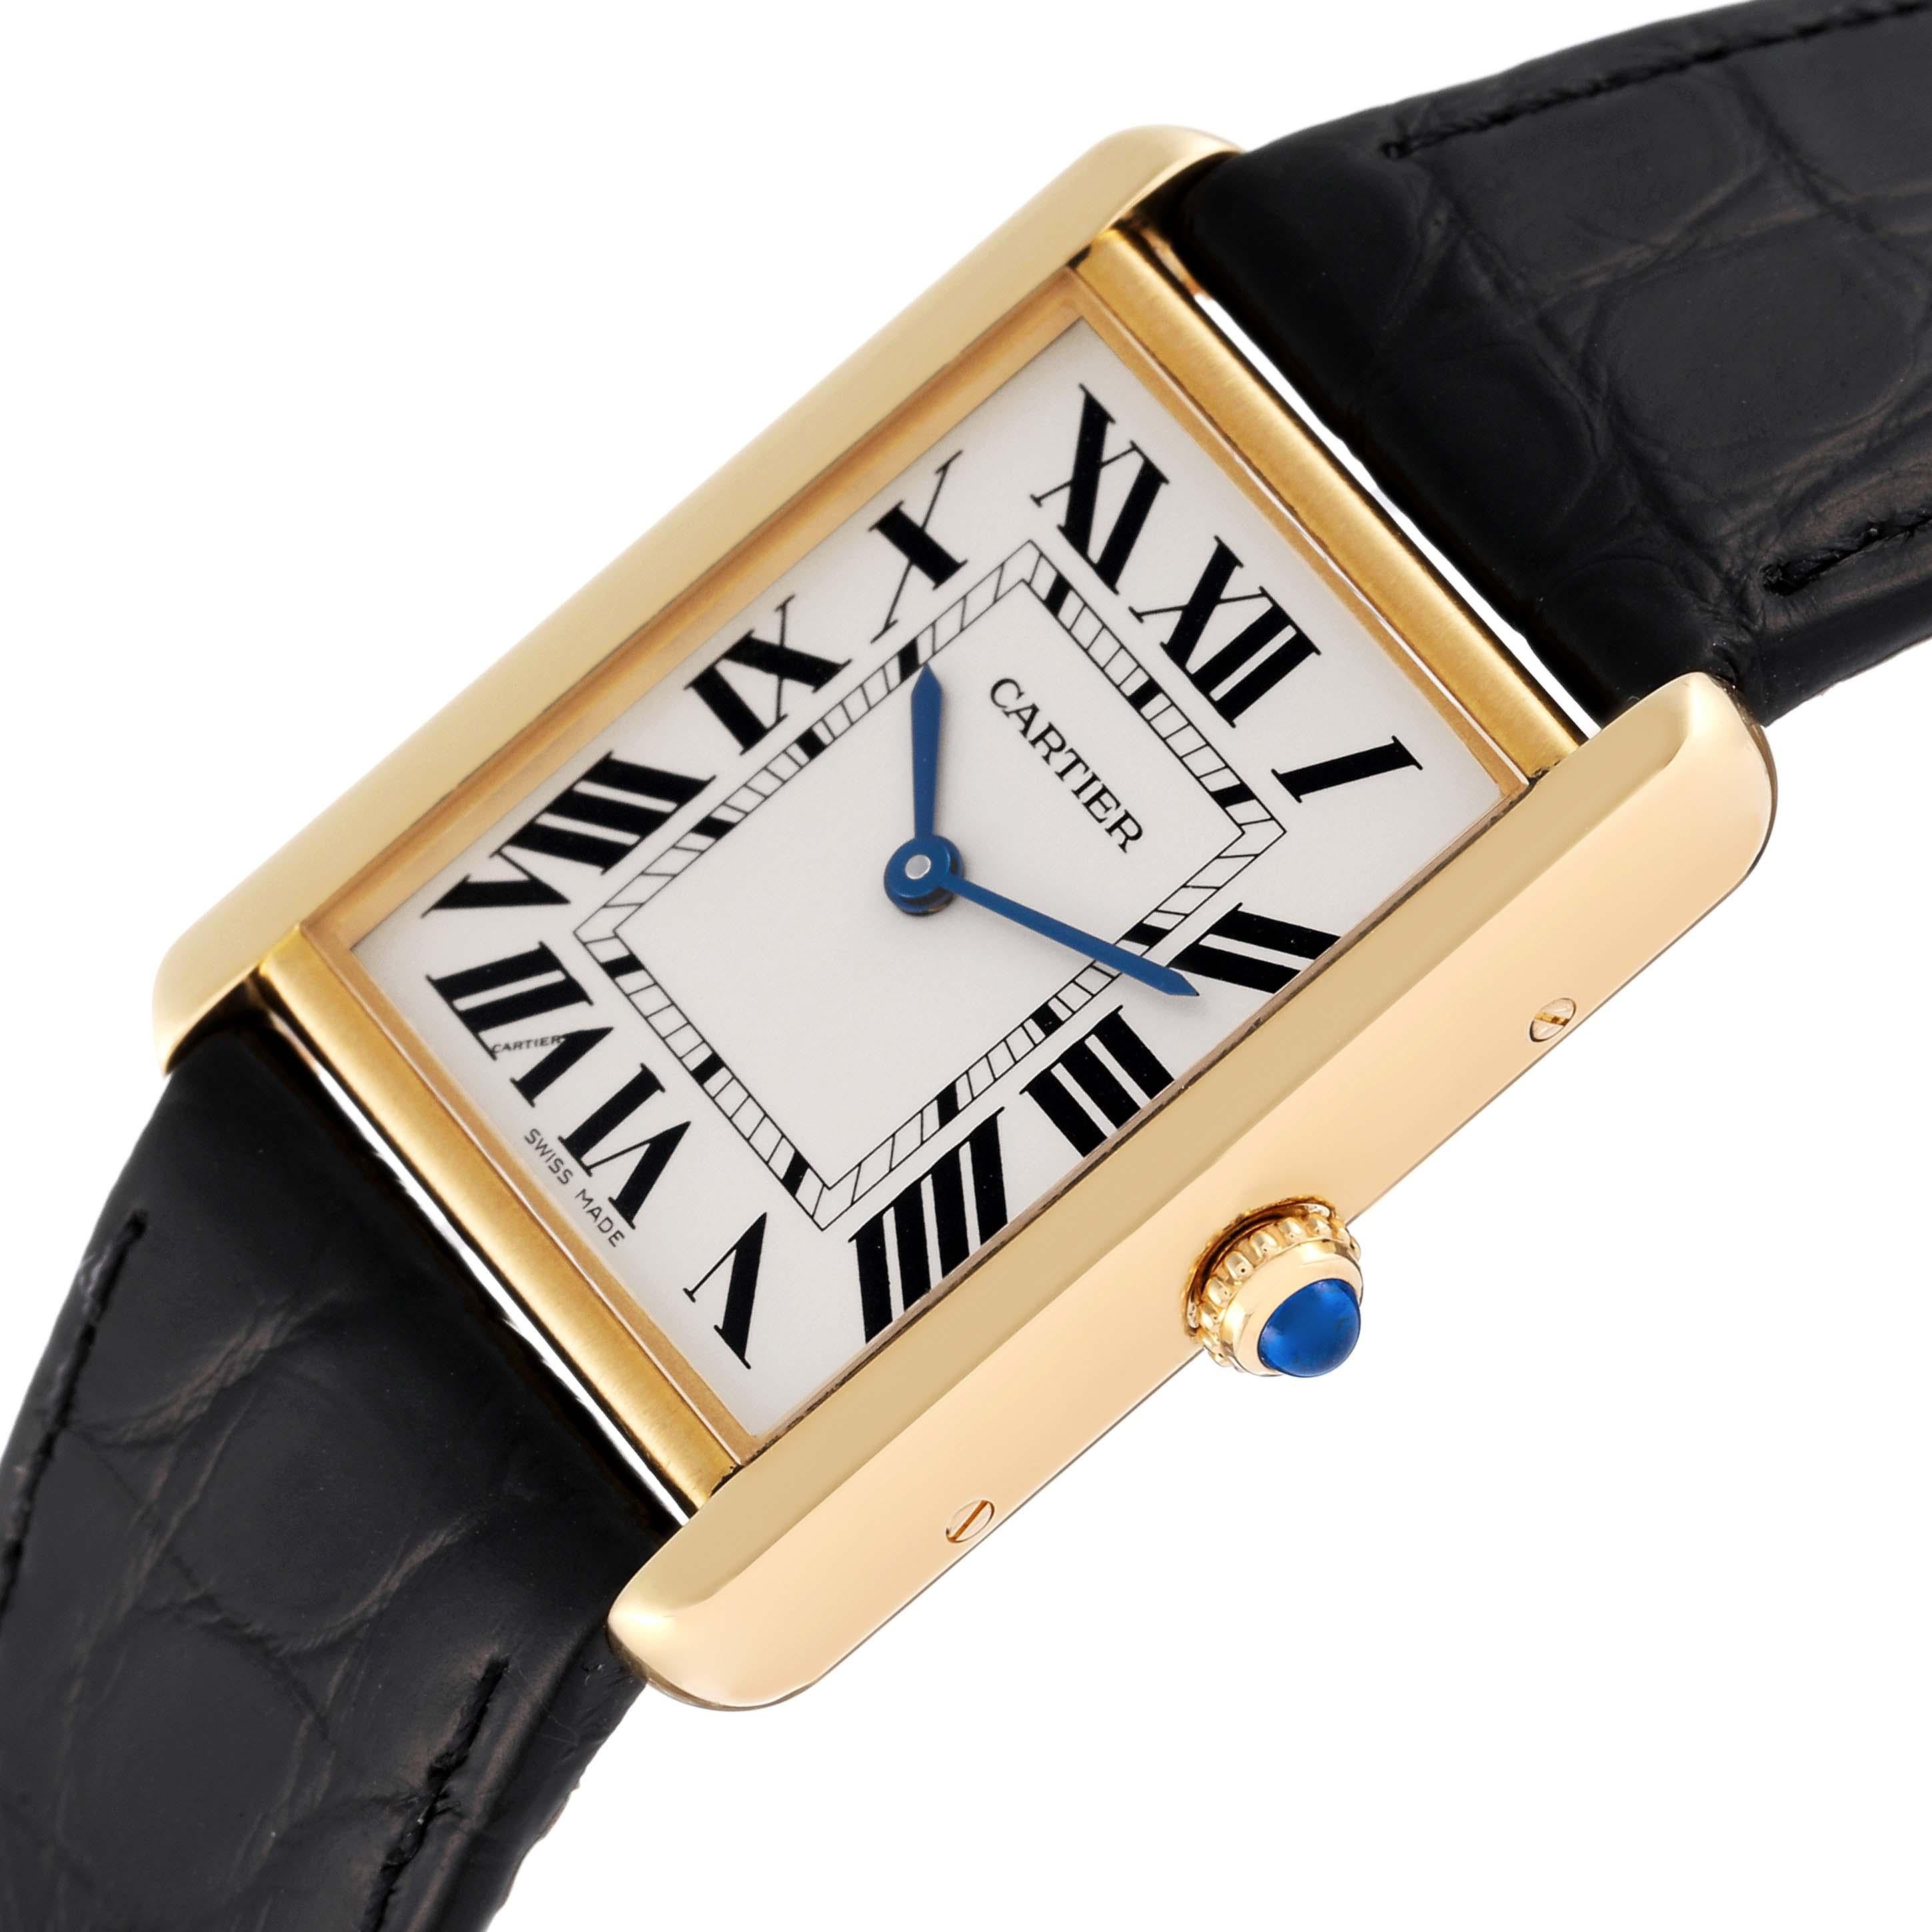 Cartier Tank Solo Large Yellow Gold Steel Mens Watch W5200004 2